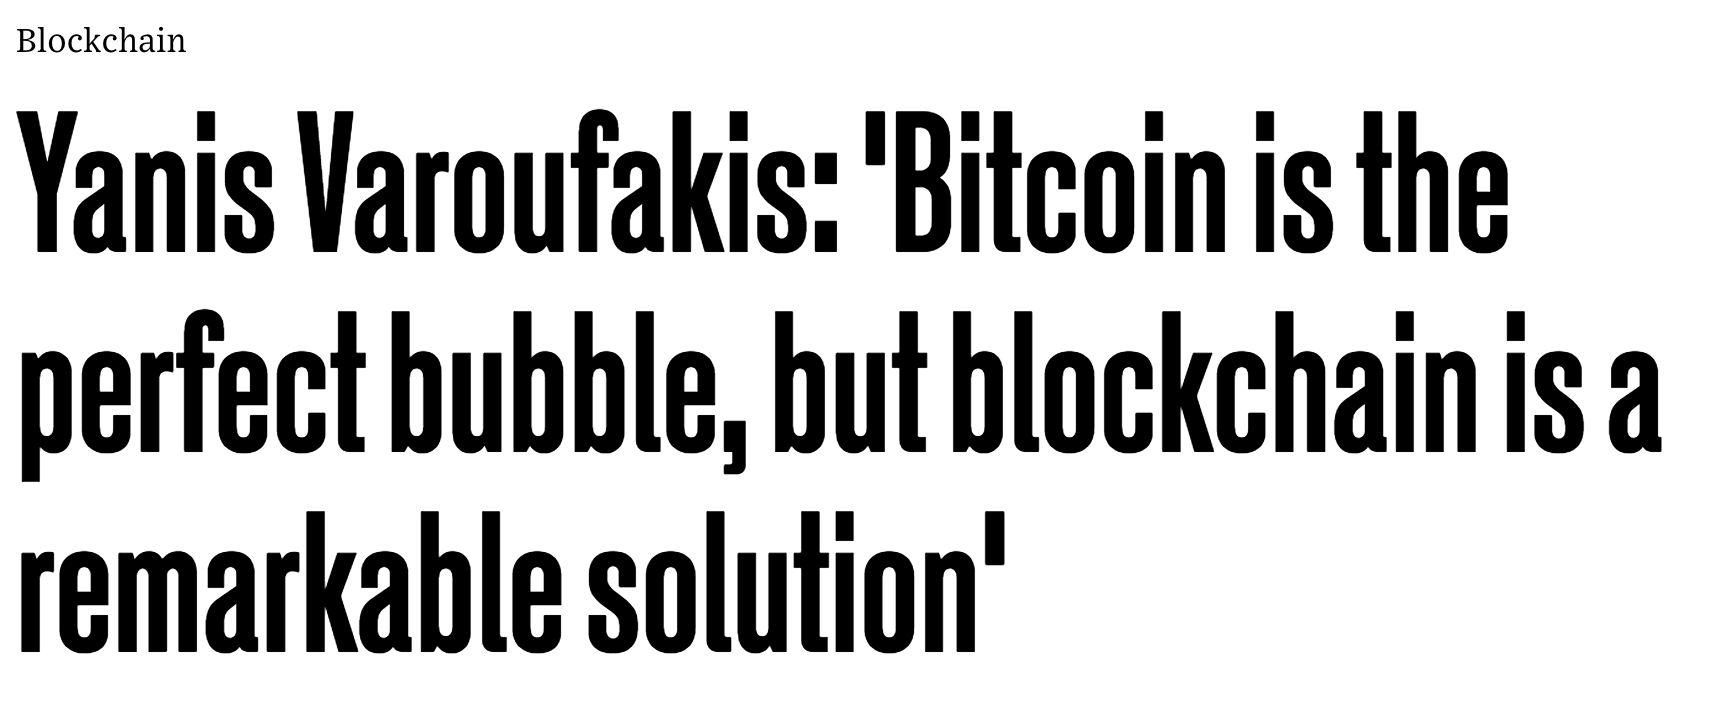 Bitcoin, Blockchain and the Future of Europe – Interviewed by Tom Upchurch for WIRED